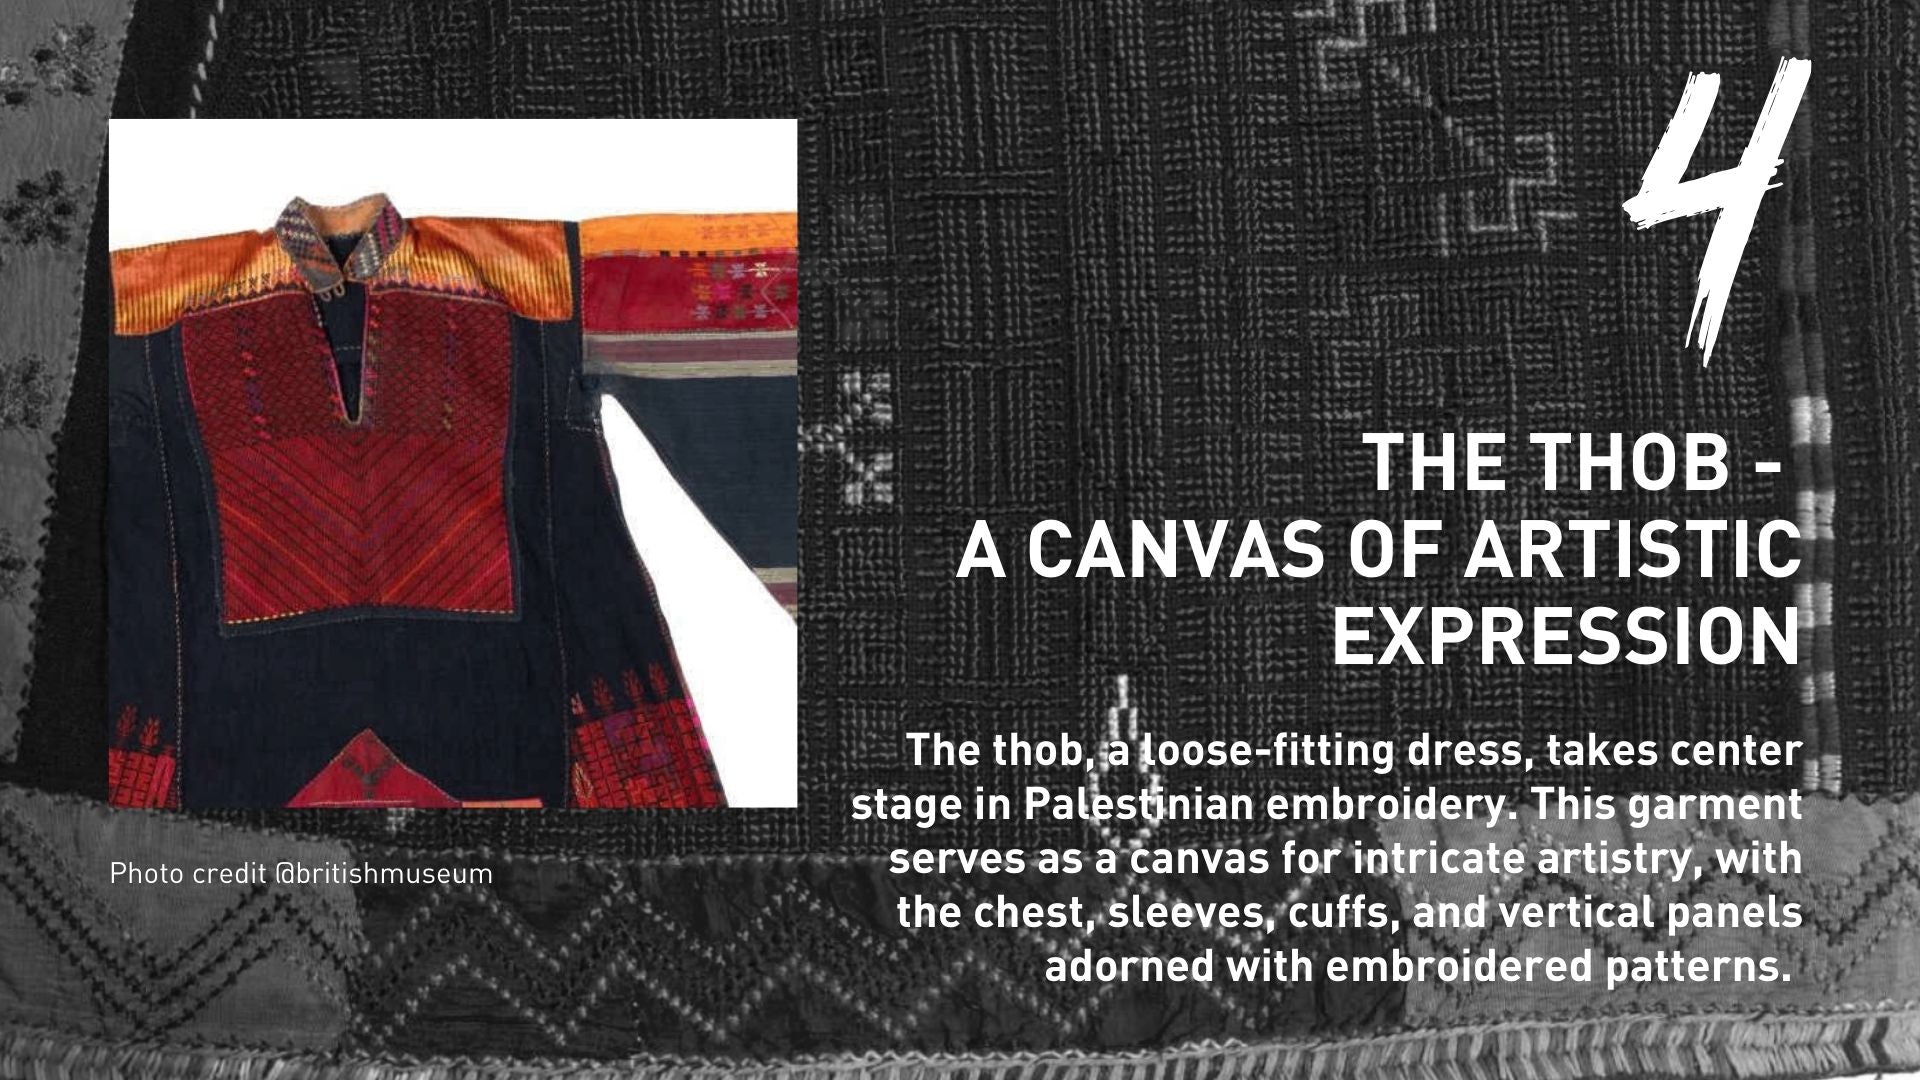 The thob, a loose-fitting dress, takes center stage in Palestinian embroidery. This garment serves as a canvas for intricate artistry, with the chest, sleeves, cuffs, and vertical panels adorned with embroidered patterns.